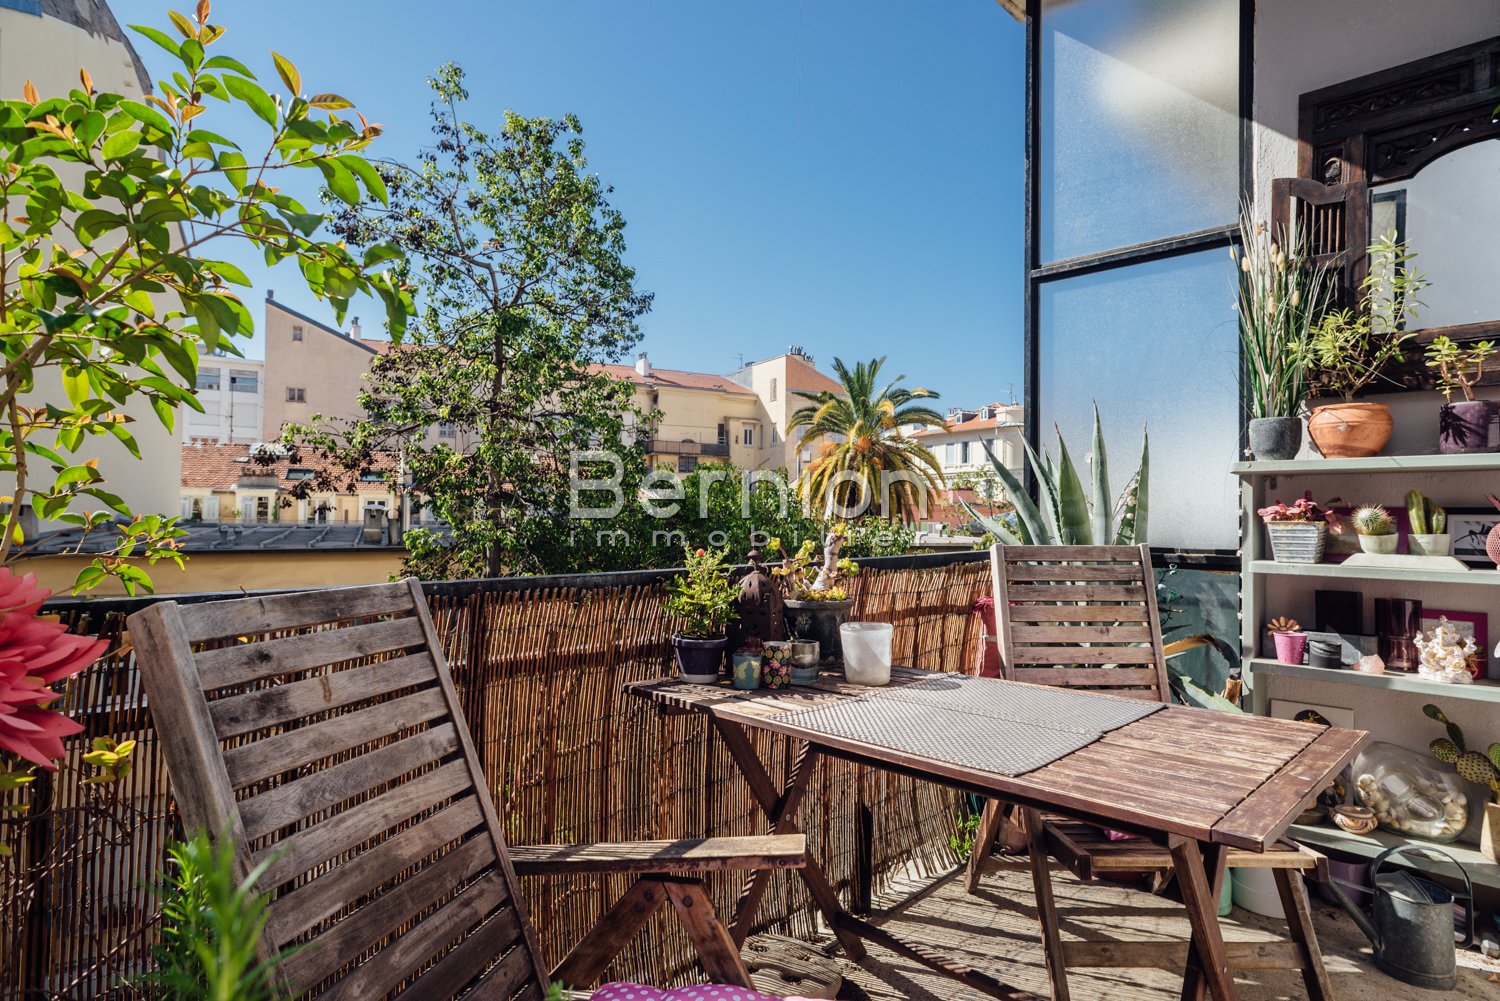 For Sale, Nice City Center Beautiful 72 sqm Apartment with terrace in Art Deco Building / photo 1